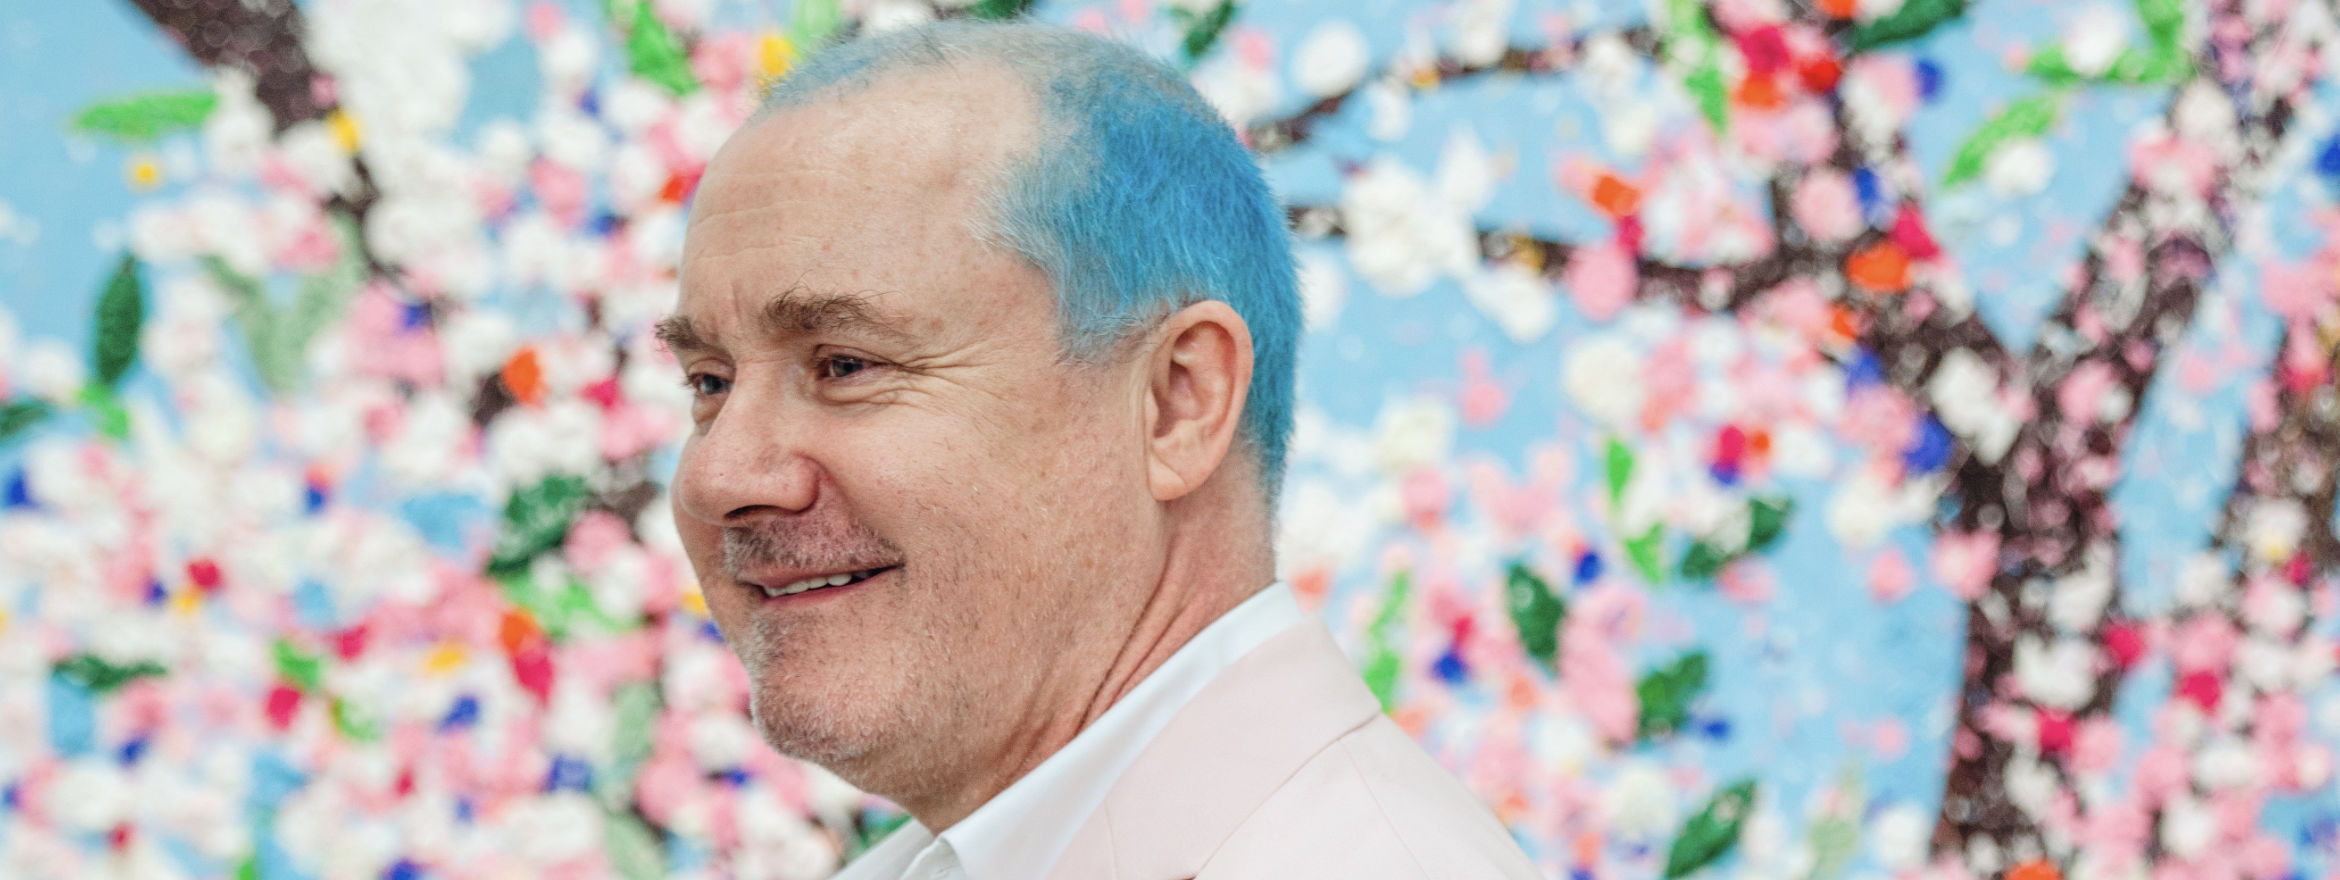 Damien Hirst Cherry Blossoms Series at Cartier Foundation for Contemporary Art